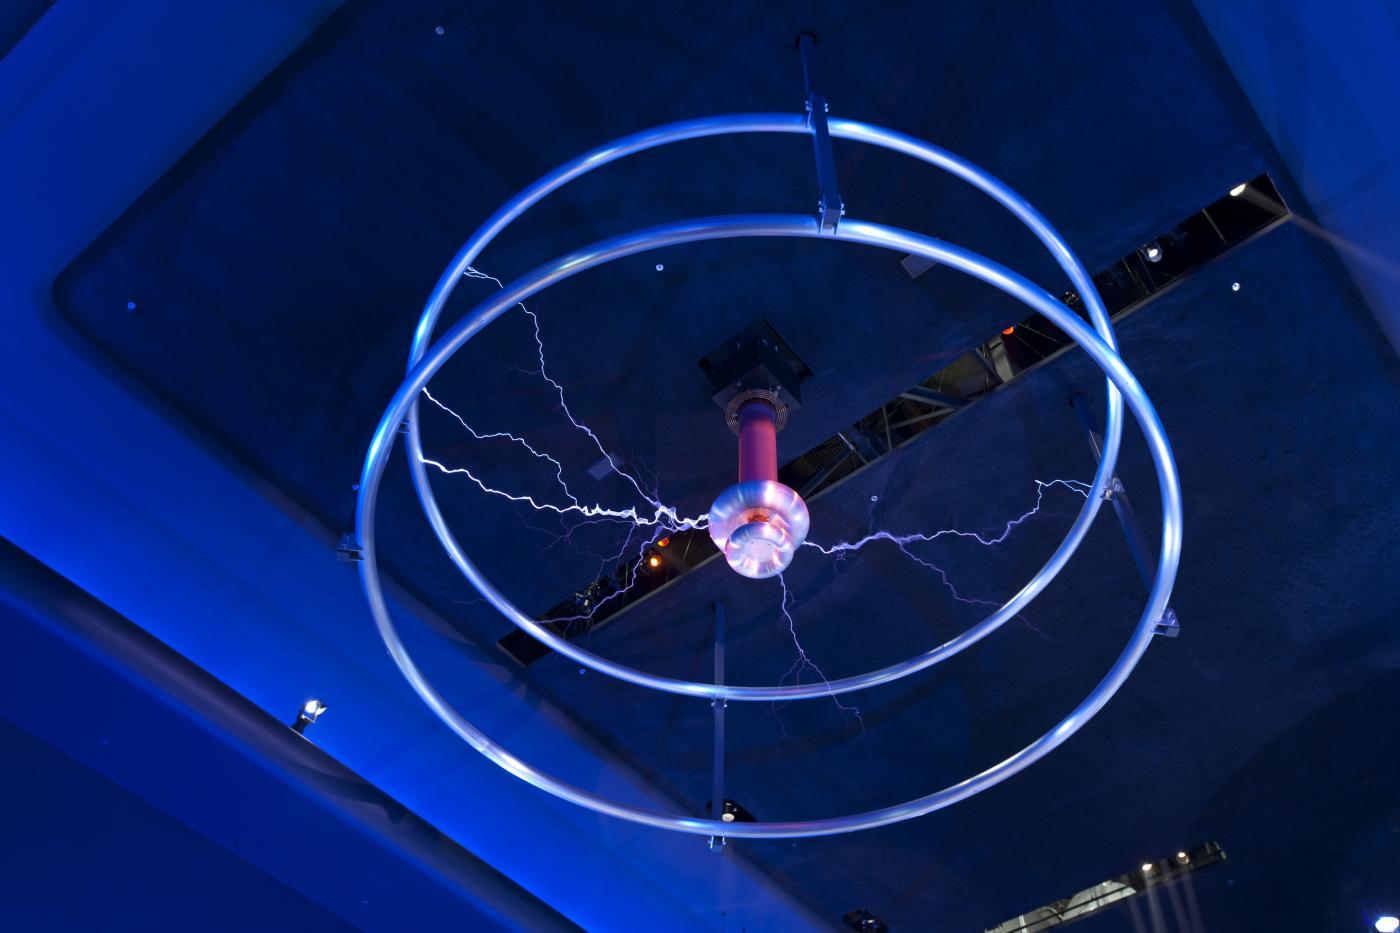 The Museum of Science and Industry's 1.2 million volt Tesla Coil. Photo: J.B. Spector/Museum of Science and Industry, Chicago